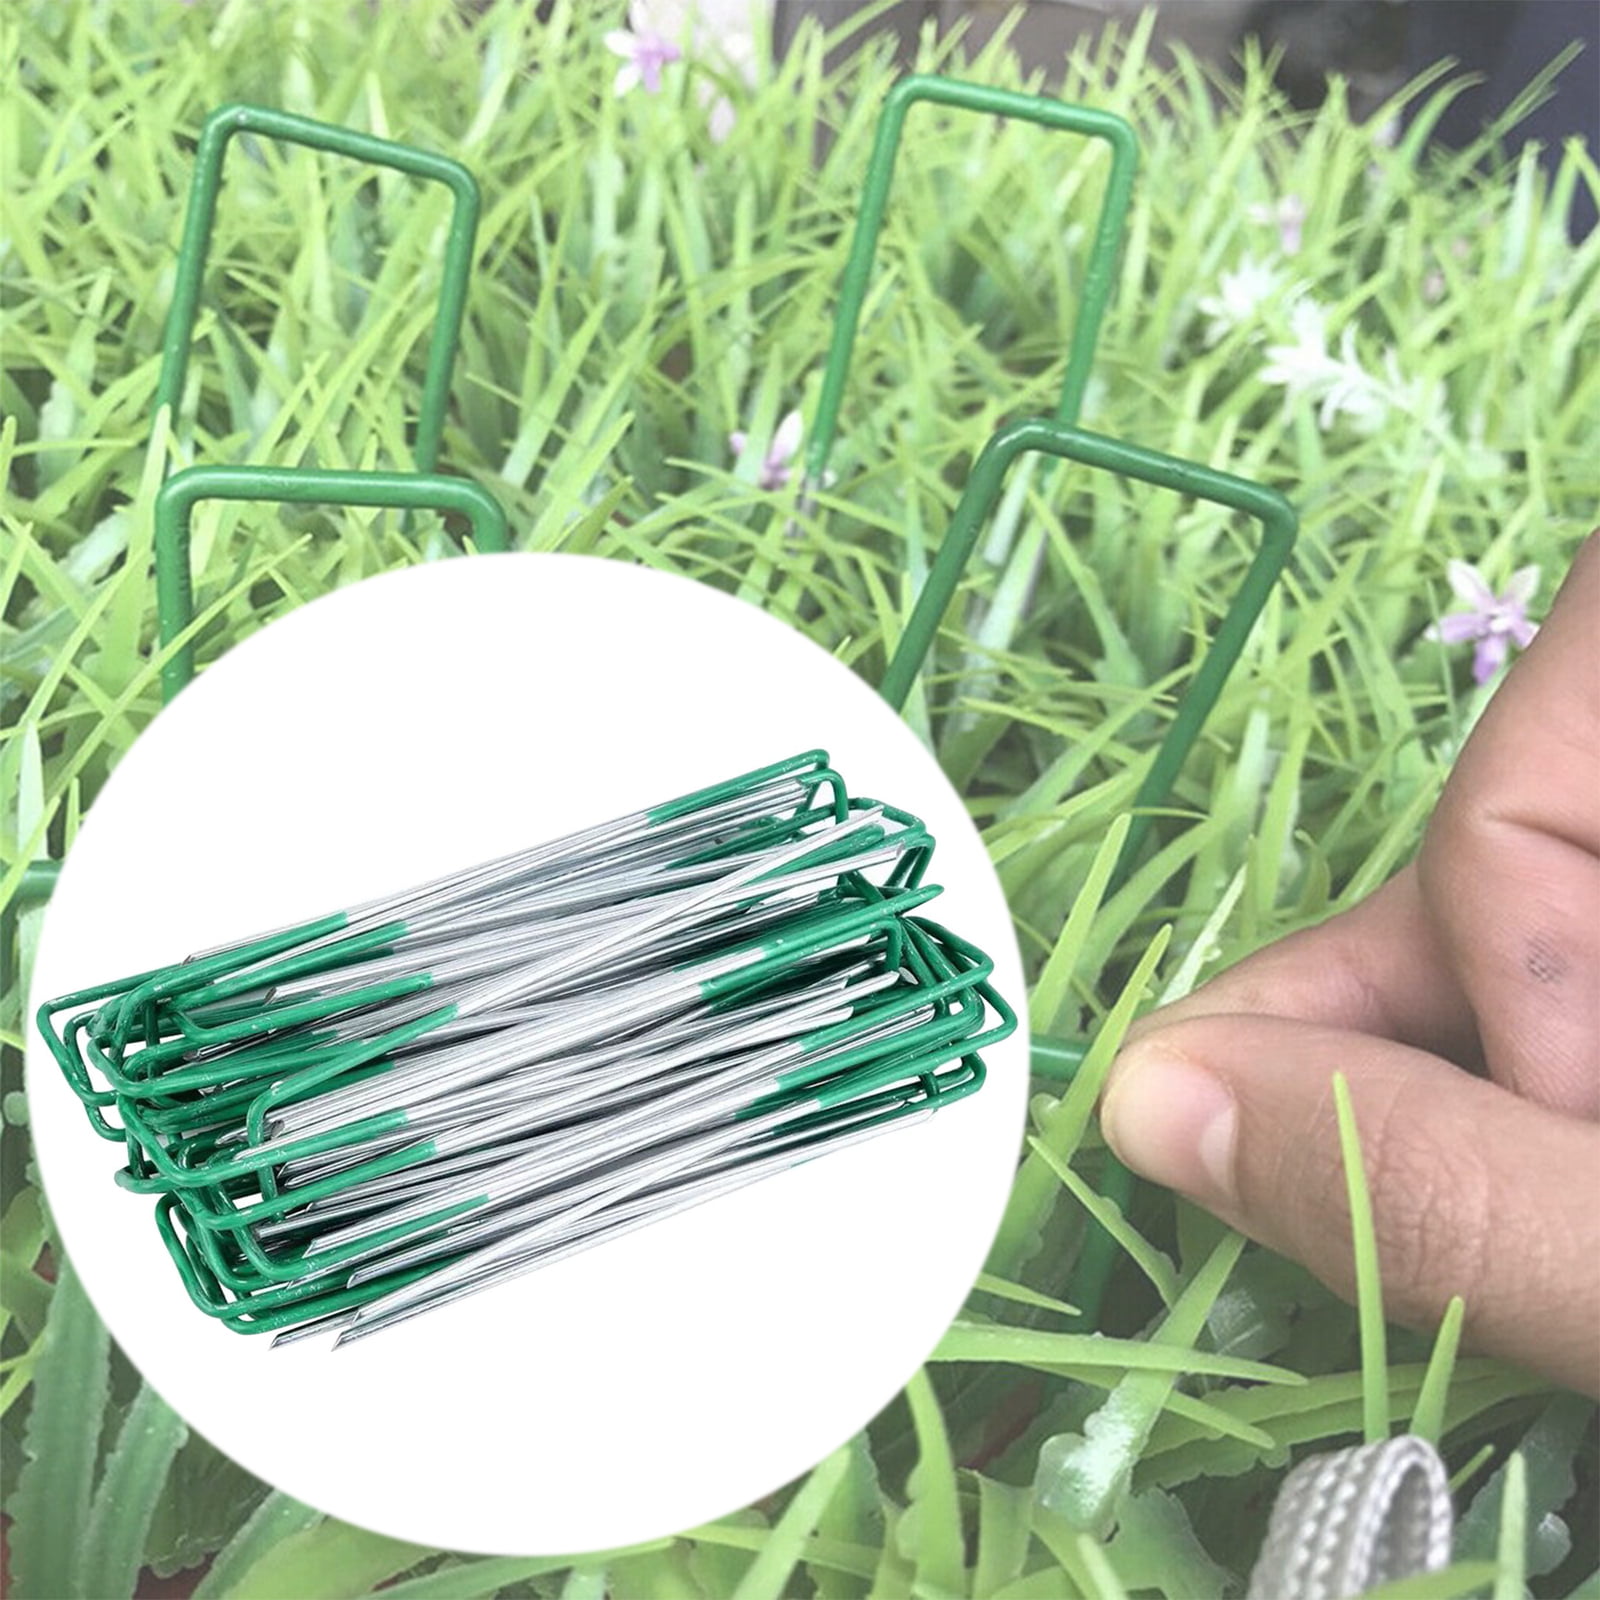 Grass Pegs Lawn Turf Artificial U Pins Stakes Steel Staples Synthetic Sod 30pcs 